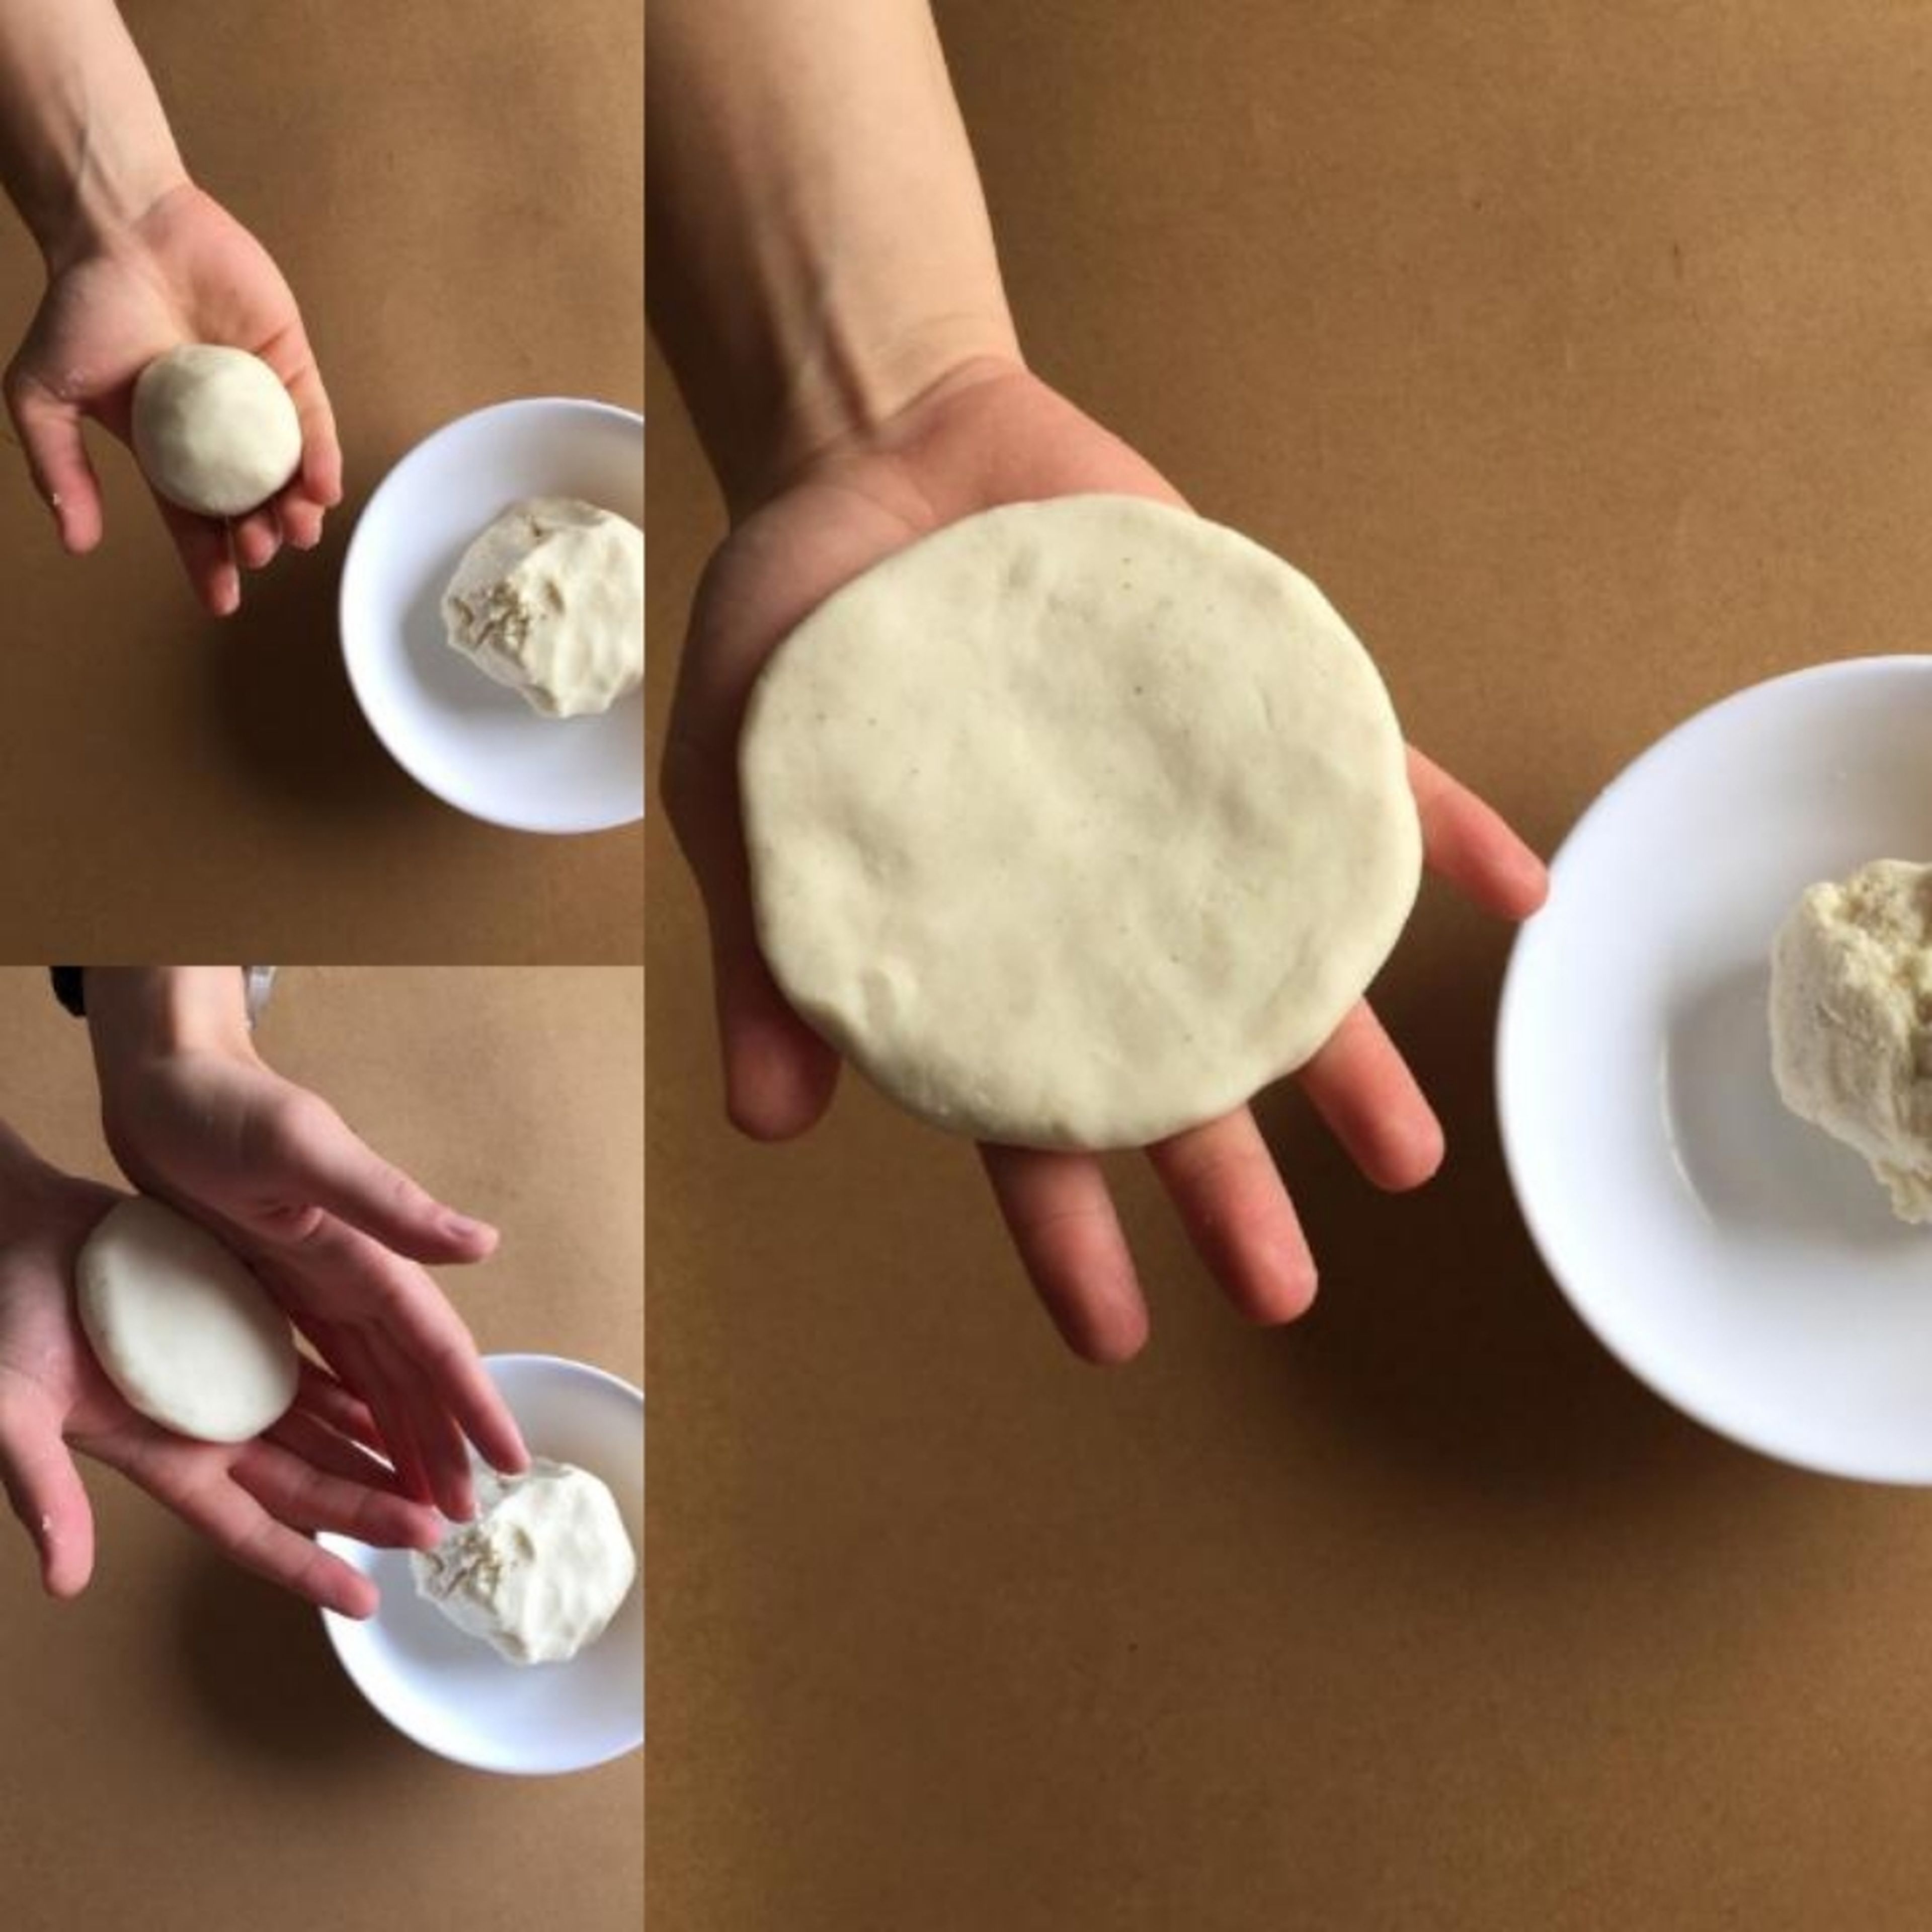 Divide dough into 3 pieces, To shape an arepa, roll the dough into a ball and then pat it, between your hands, into a disc. Press your thumbs around the outside of the disc to form a nice edge.